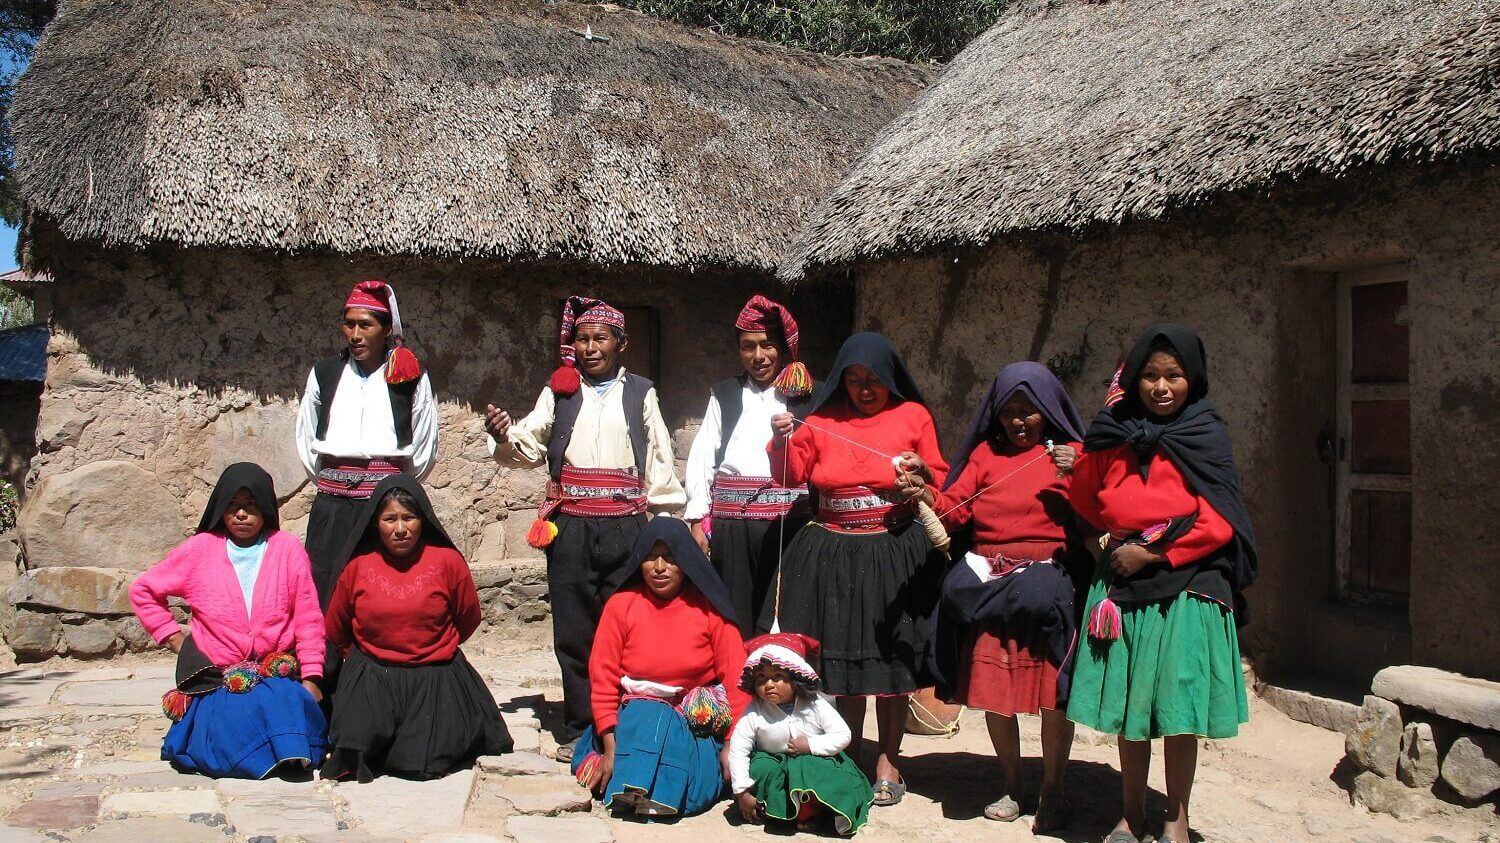 Group picture of tourism committee on Taquile island, local men and women wearing traditional dresses. Community-Based Tourism in Peru with RESPONSible Travel Peru.